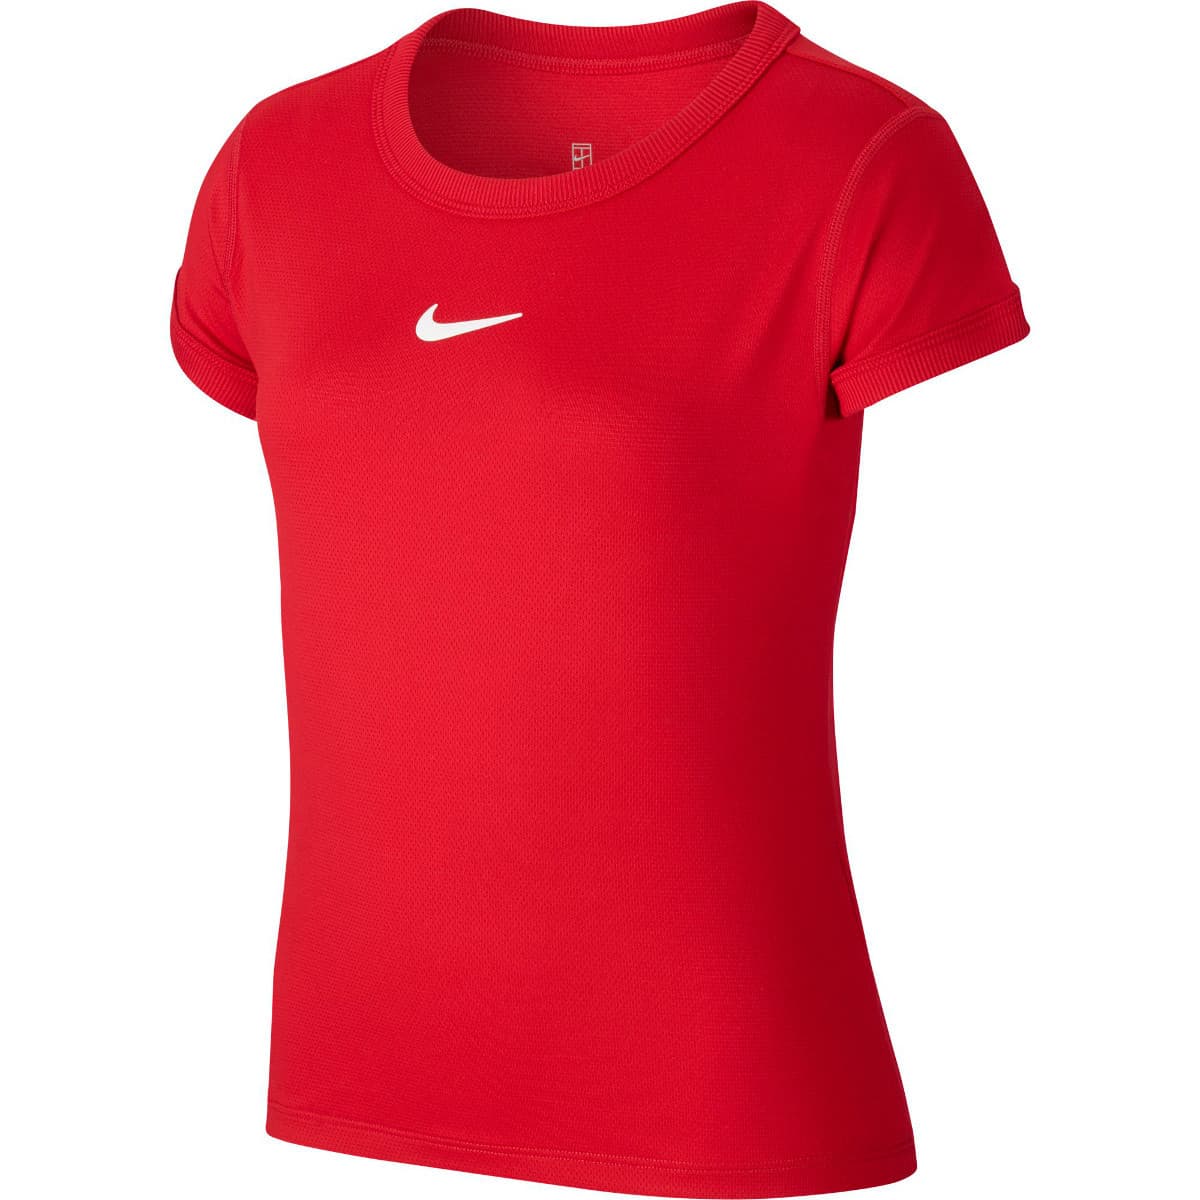 nike court dry top